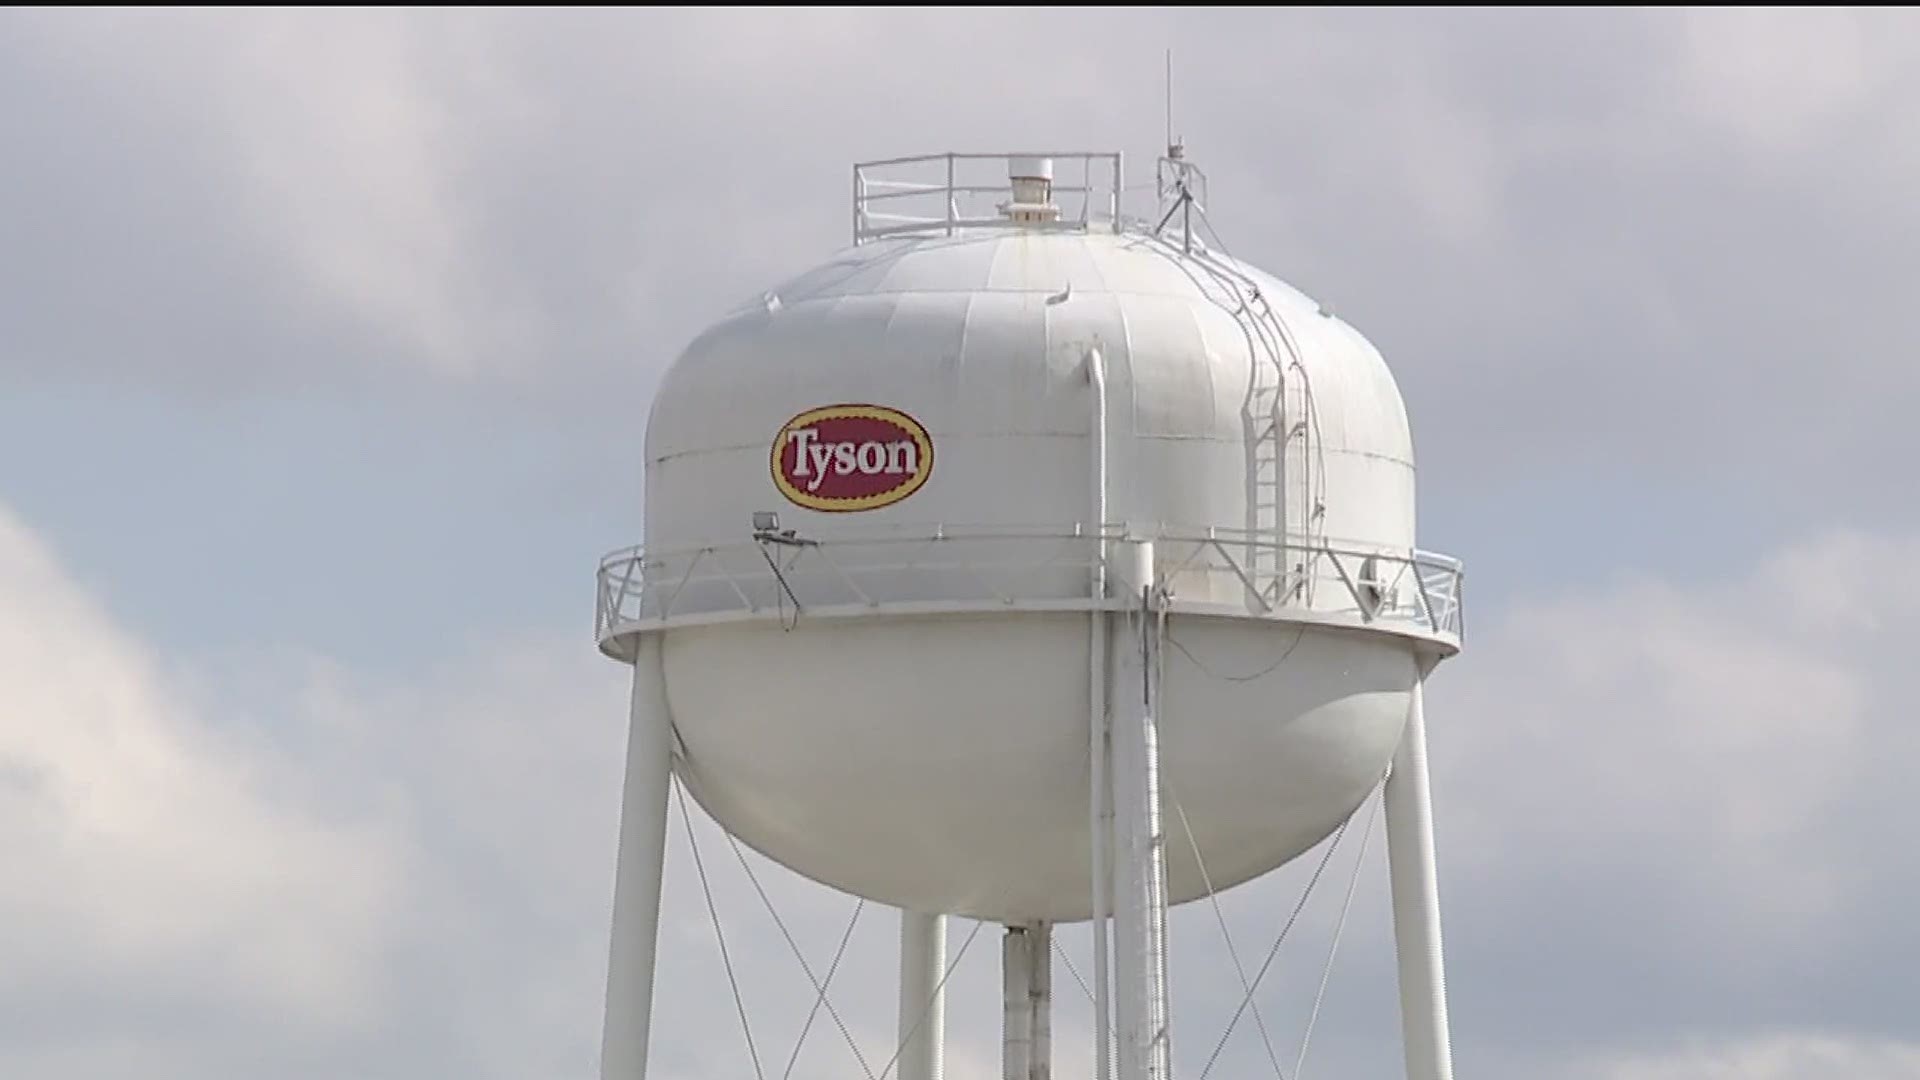 Iowa Governor Kim Reynolds on Tuesday announced 86 new COVID-19 cases at the Tyson Foods plant in Columbus Junction.